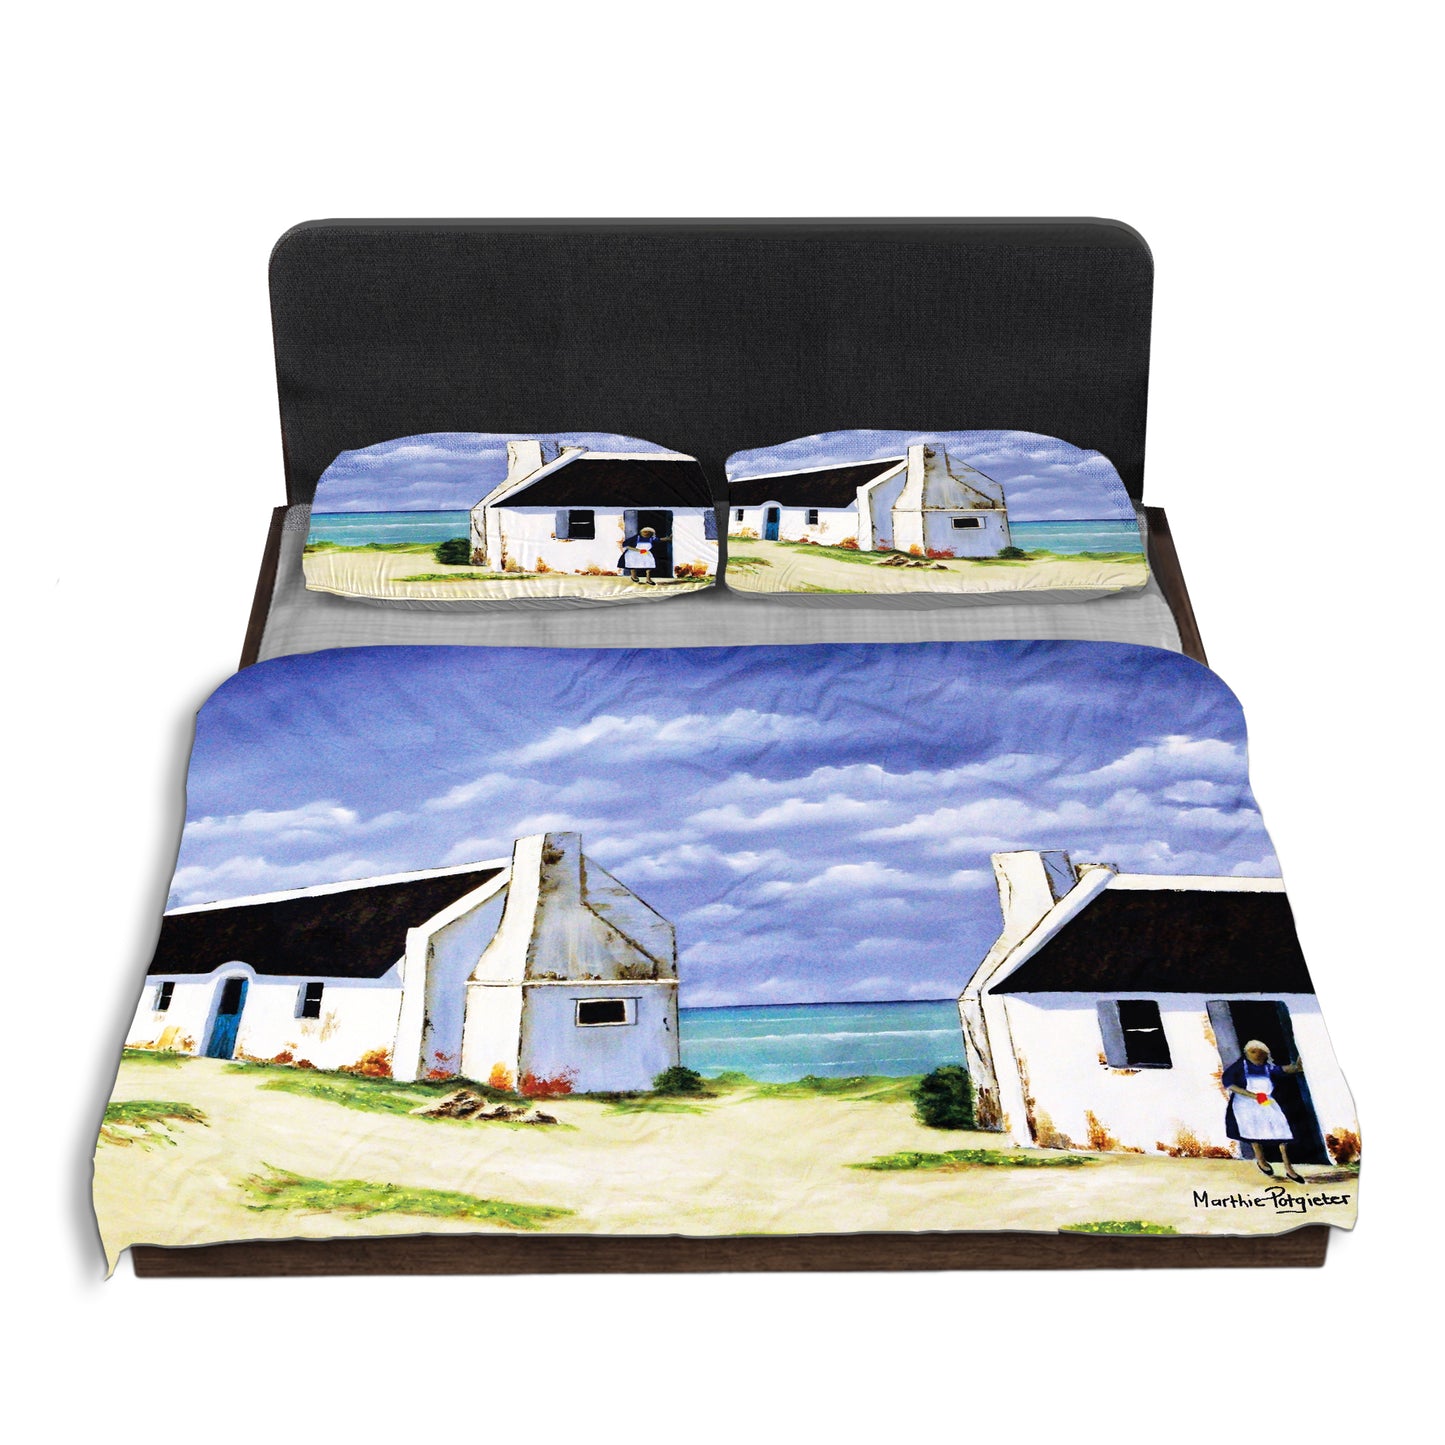 Home with a View Duvet Cover Set By Marthie Potgieter